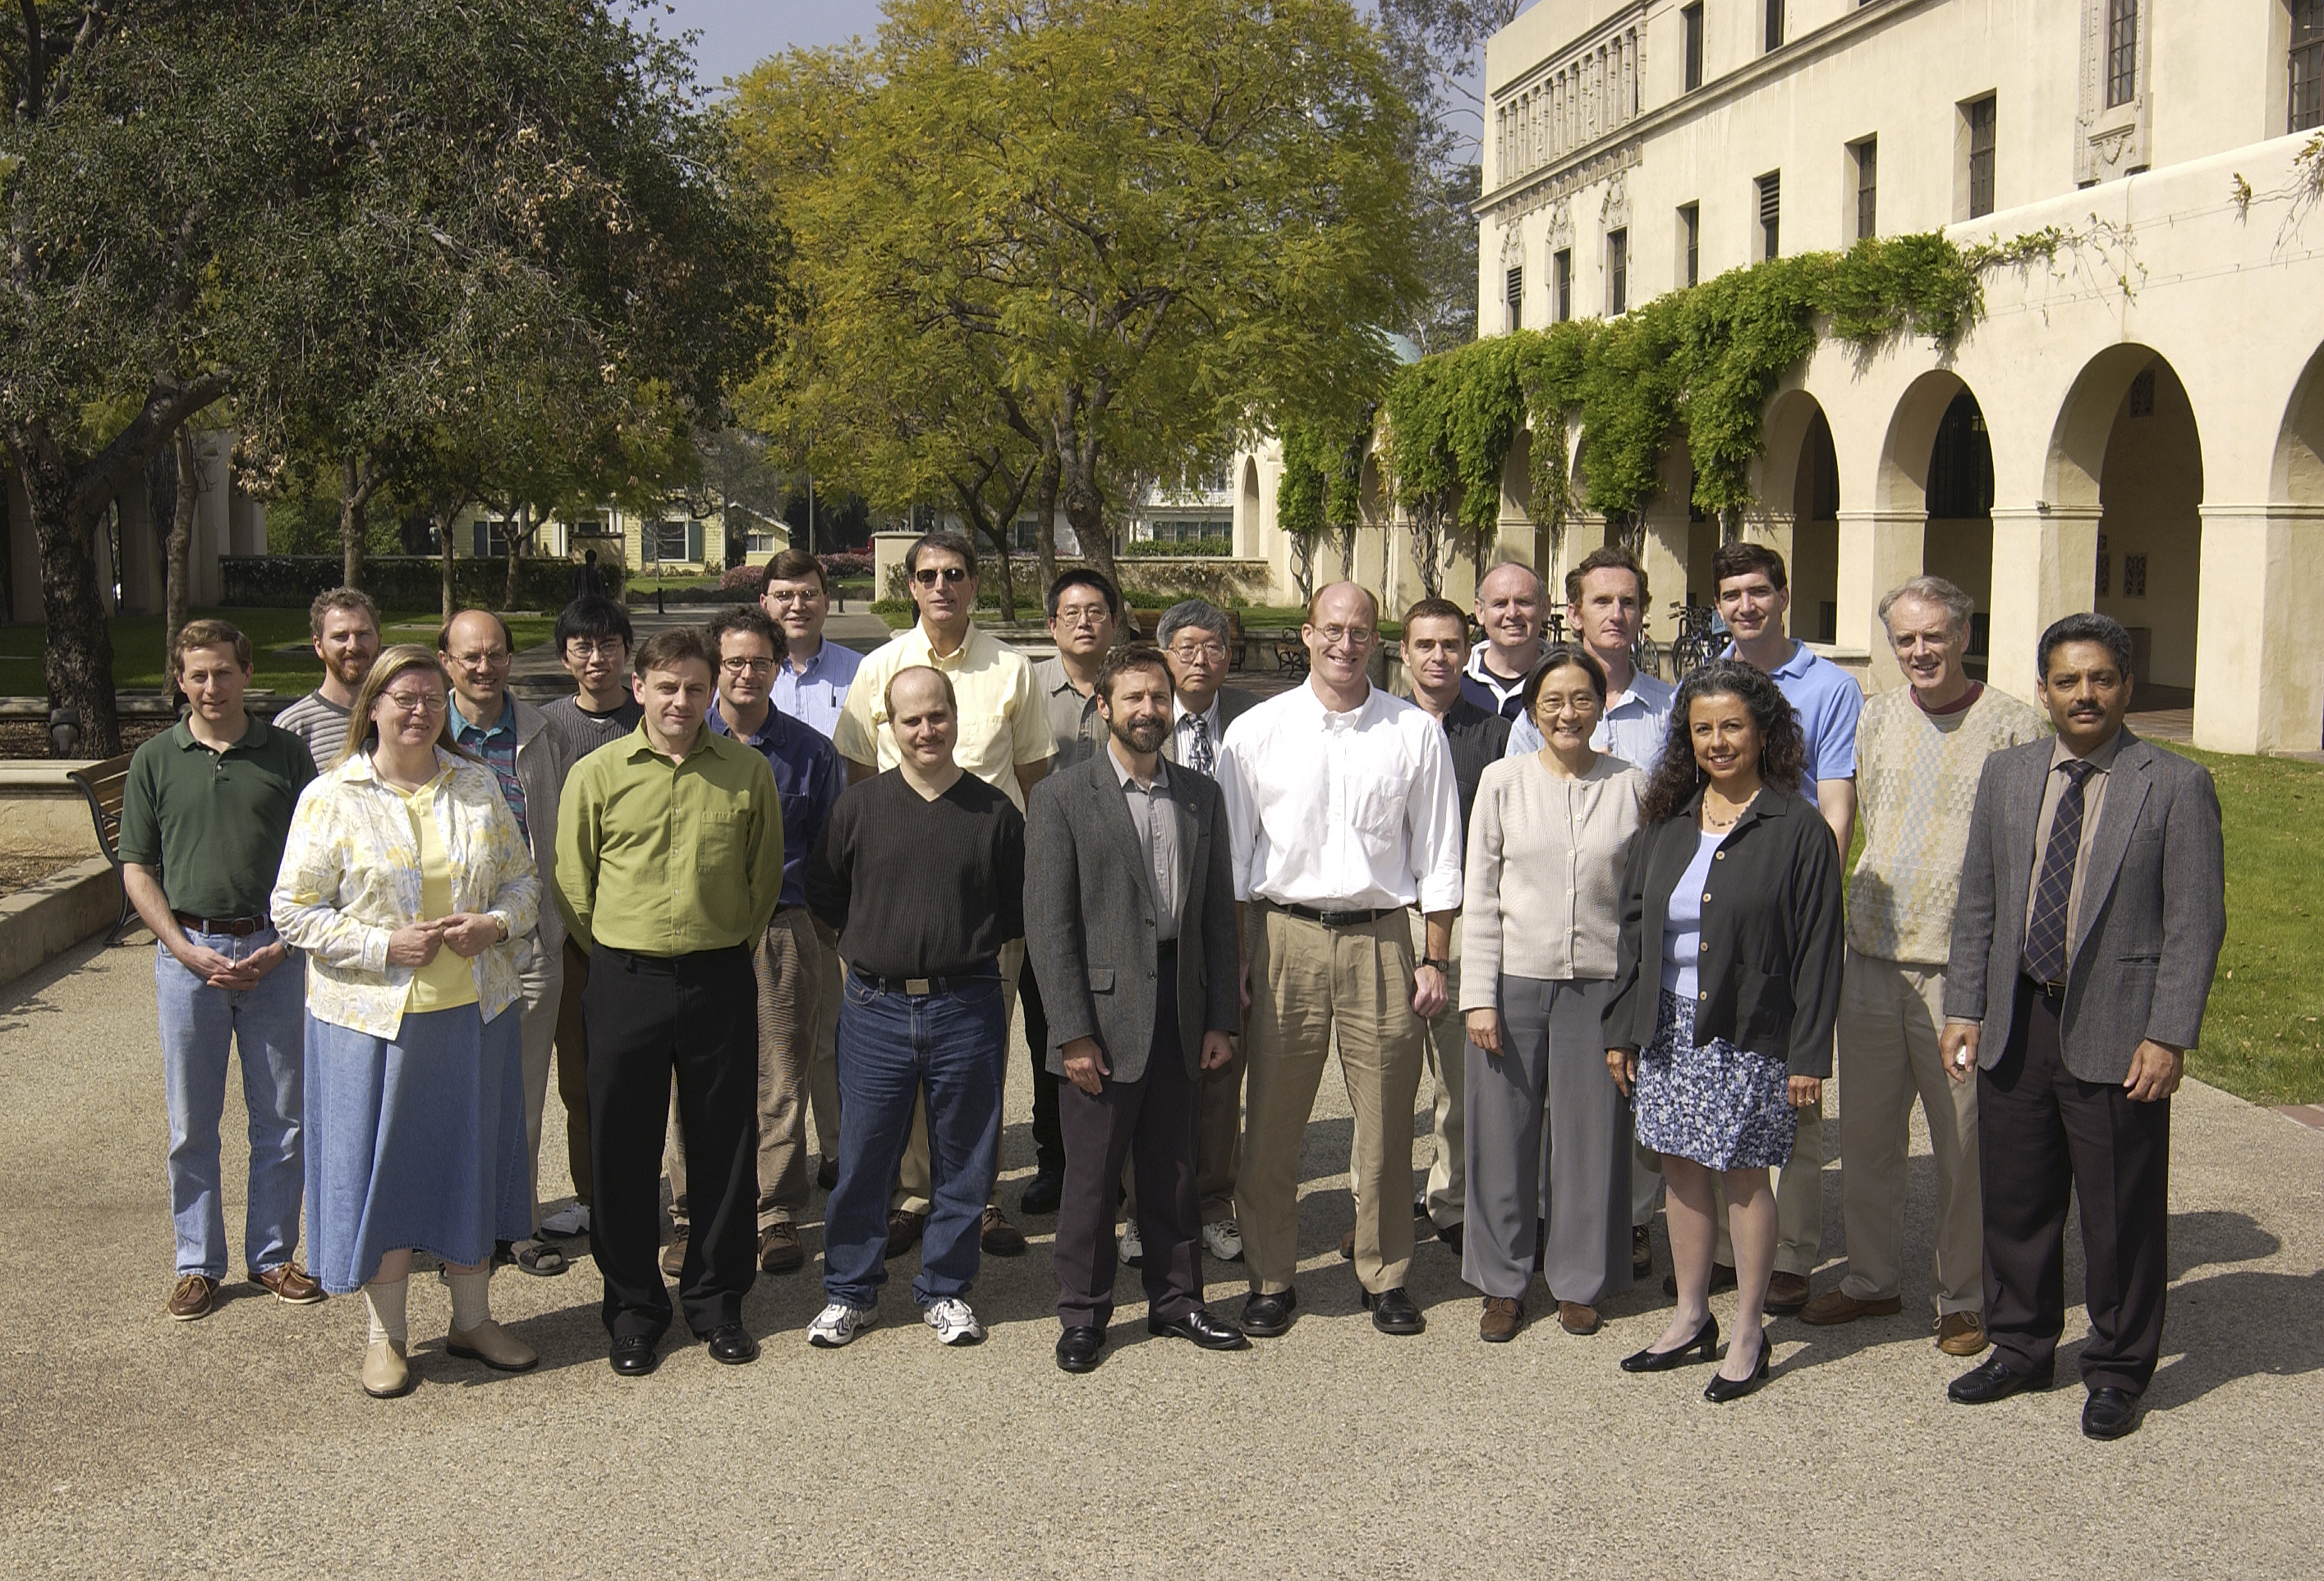 About 20 scientists, part of the earliest OCO-2 science team in 2003, pose outside on Caltech's campus on a sunny day. Dave Crisp stands in the center.